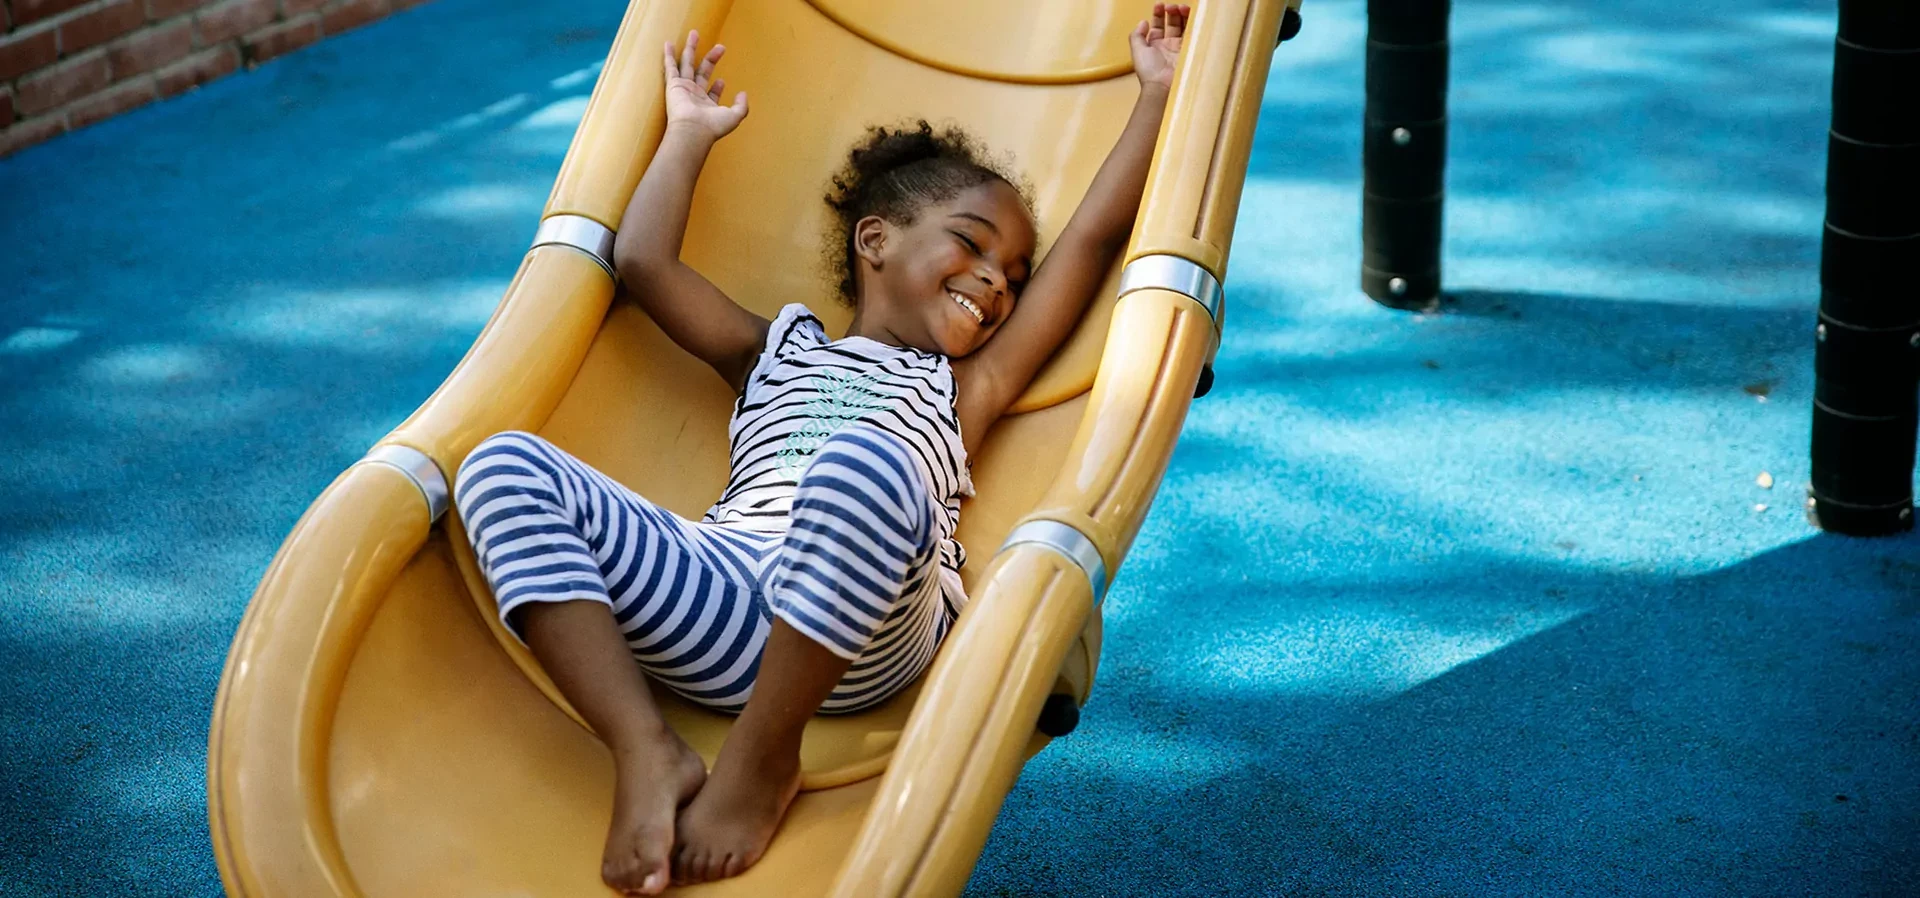 A girl in a striped outfit sliding down a yellow slide with bright blue surfacing underneath. Including bright colours within your playground construction details can produce vibrant and enticing results.